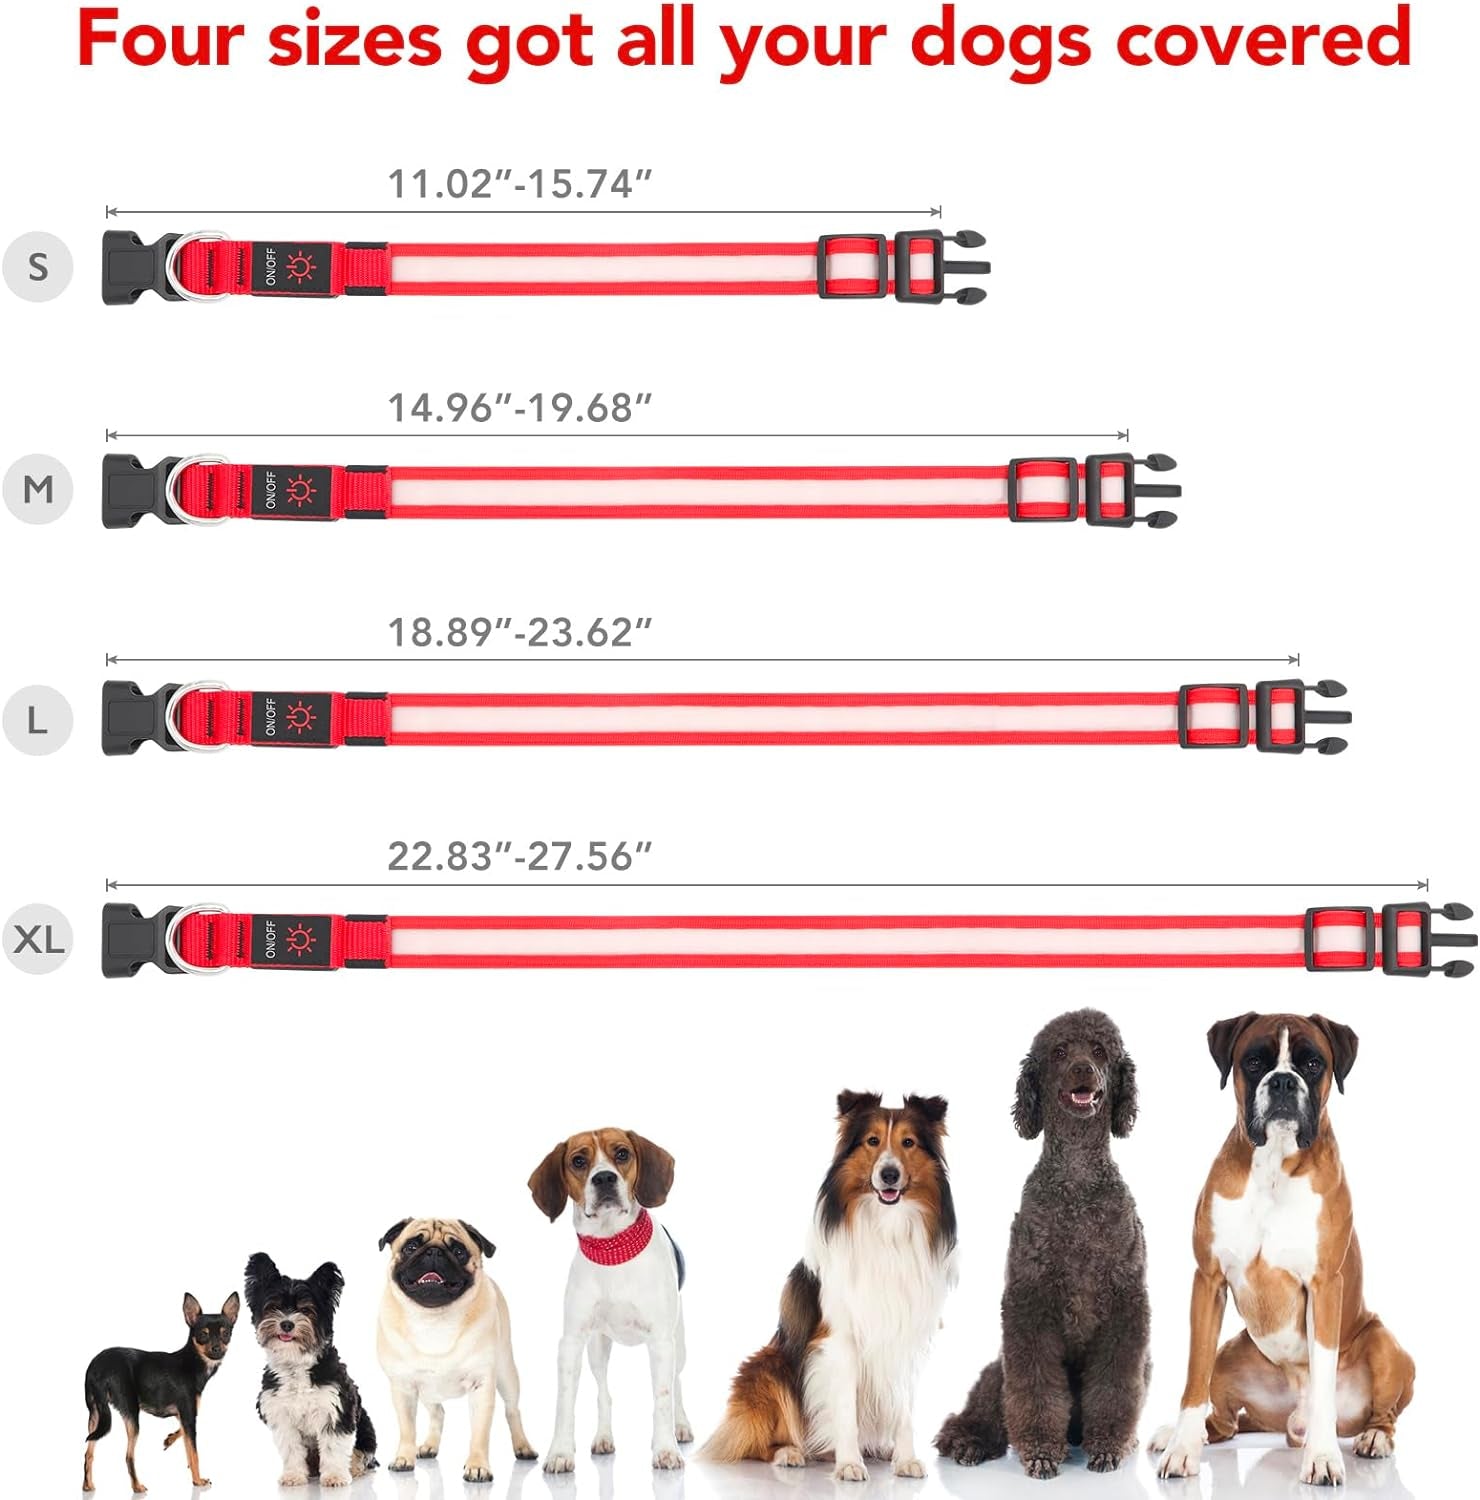 LED Dog Collar, Light up Dog Collar Adjustable USB Rechargeable Super Bright Safety Light Glowing Collars for Dogs